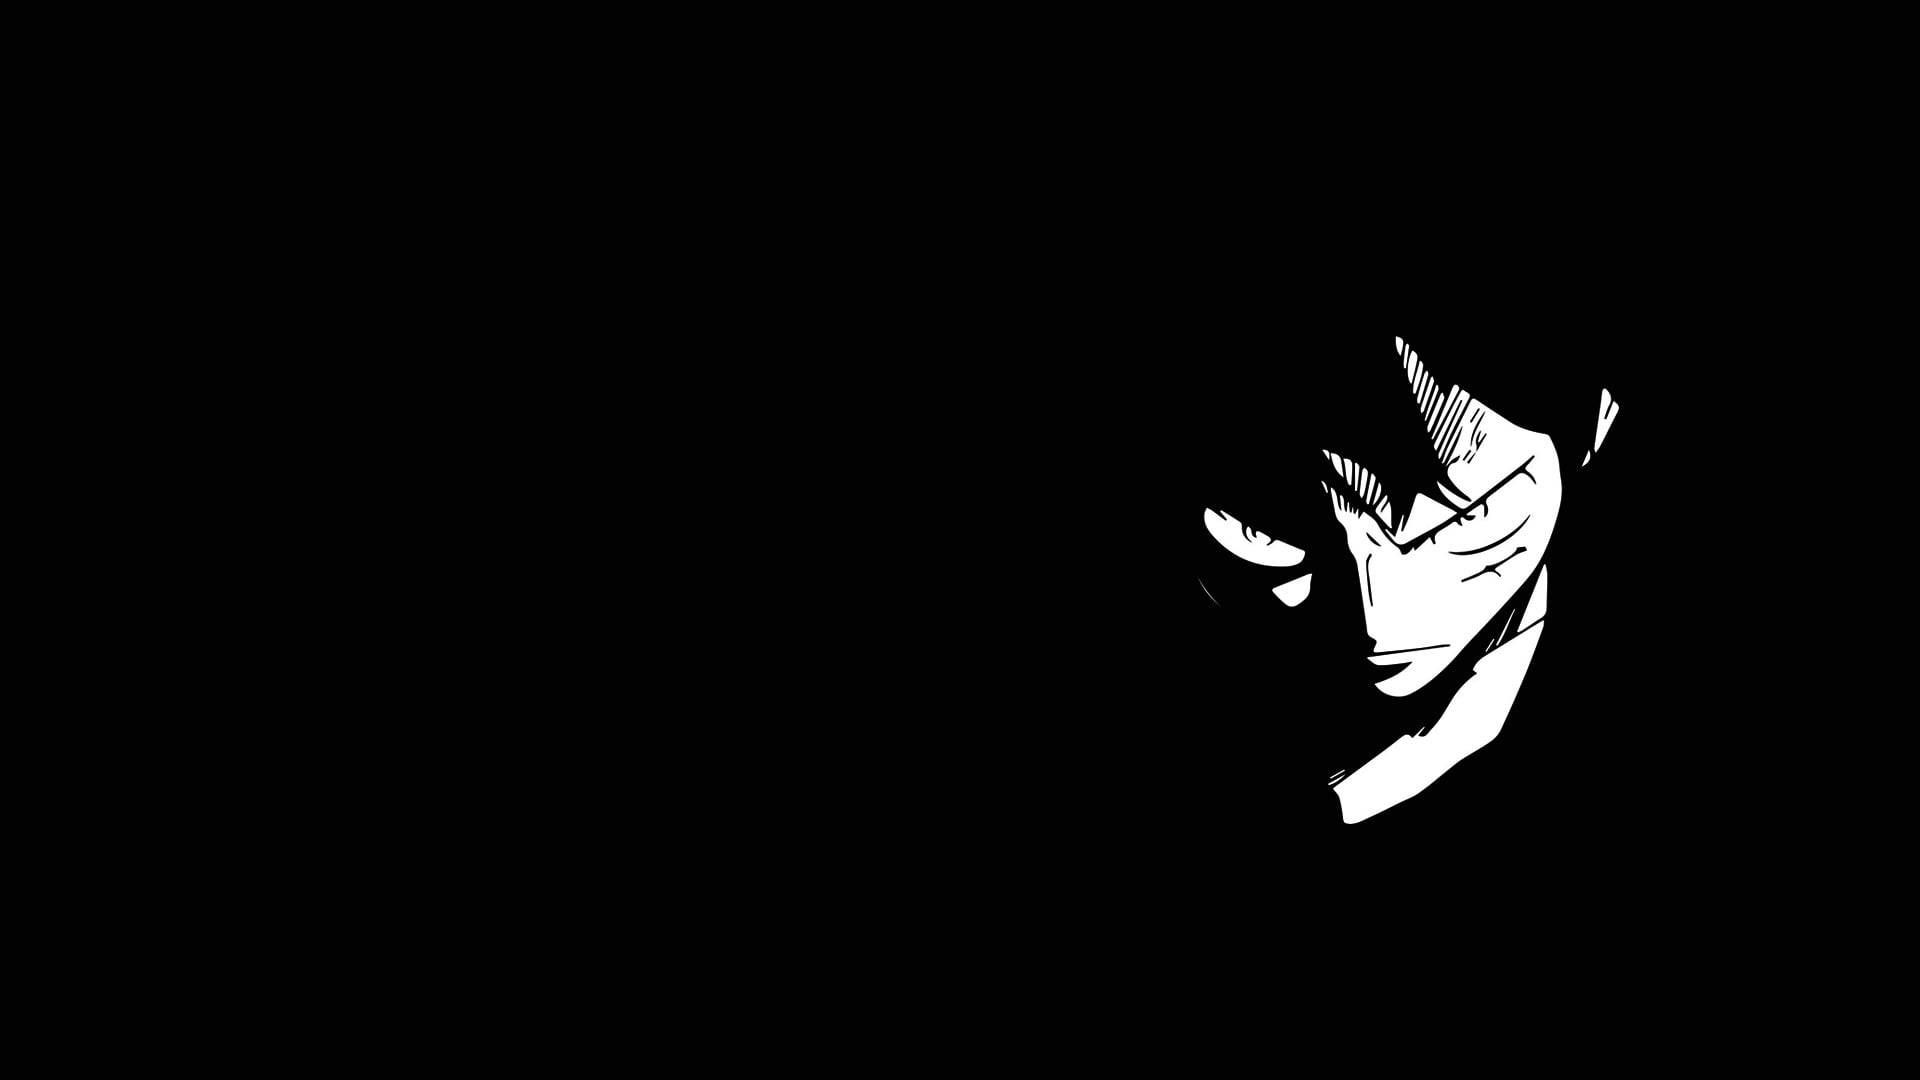 One Piece anime black background with white outline of Luffy's face - Dark anime, black anime